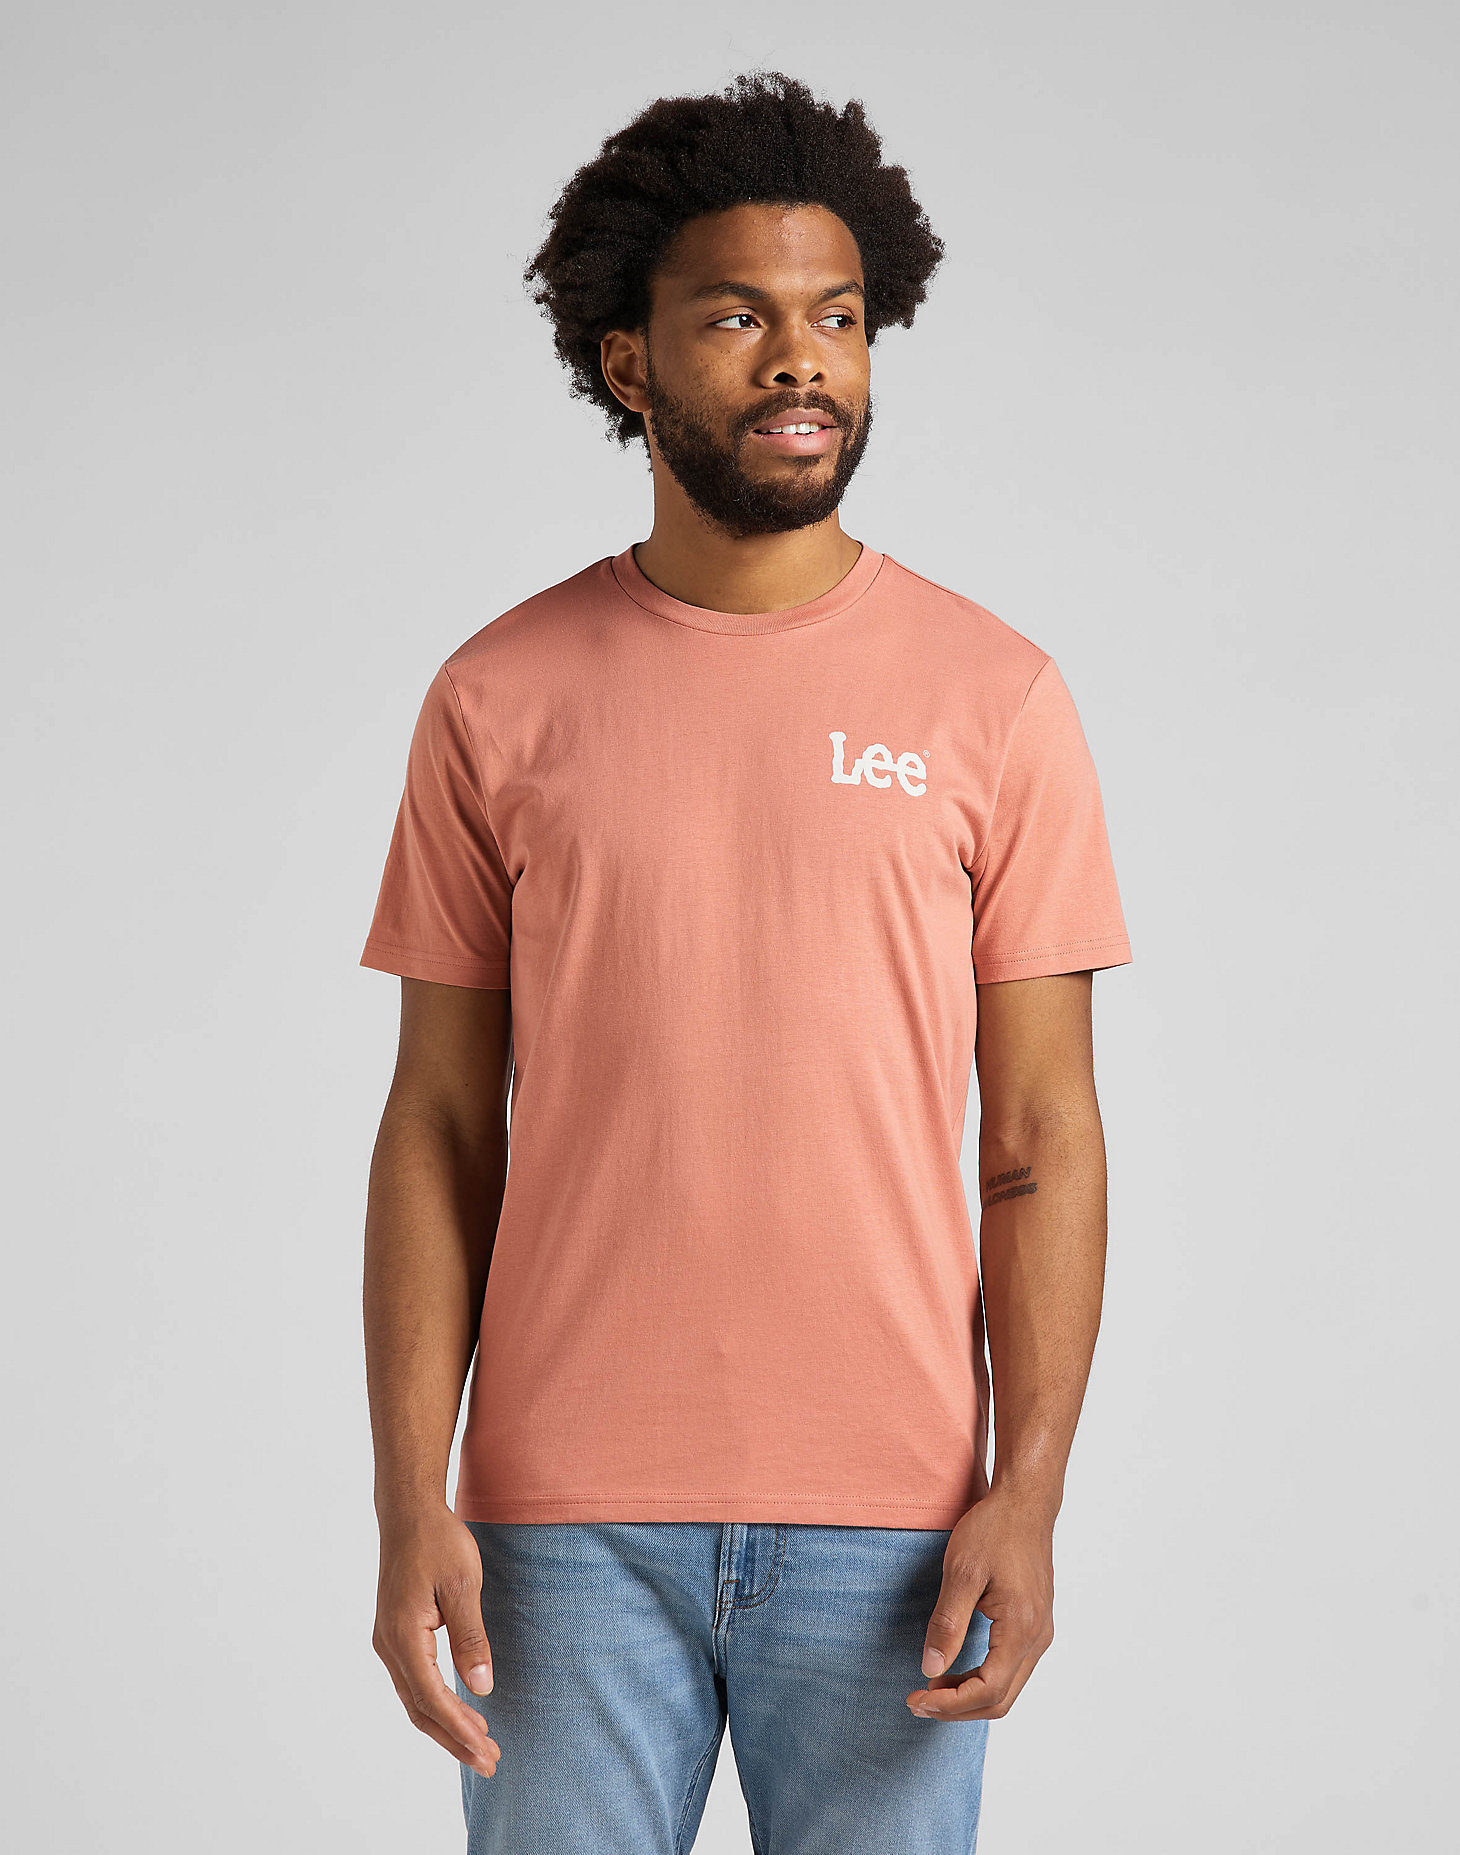 Wobbly Logo Tee in Rust main view